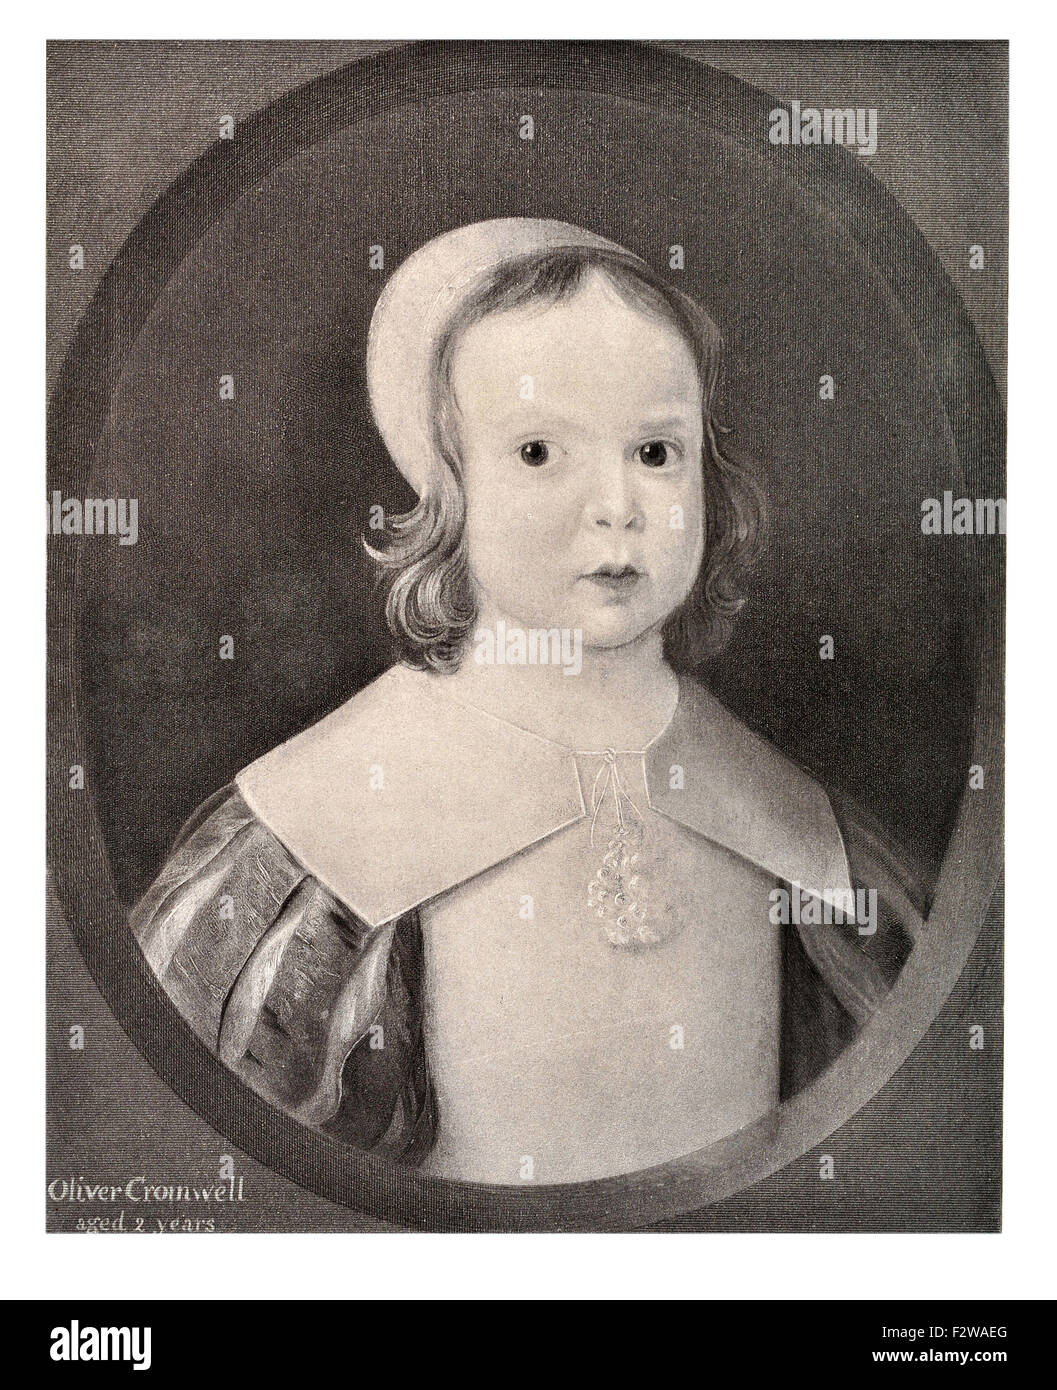 Oliver Cromwell two 2 years child baby infant English military political leader Lord Protector Commonwealth England Scotland Ireland puritan civil war Stock Photo